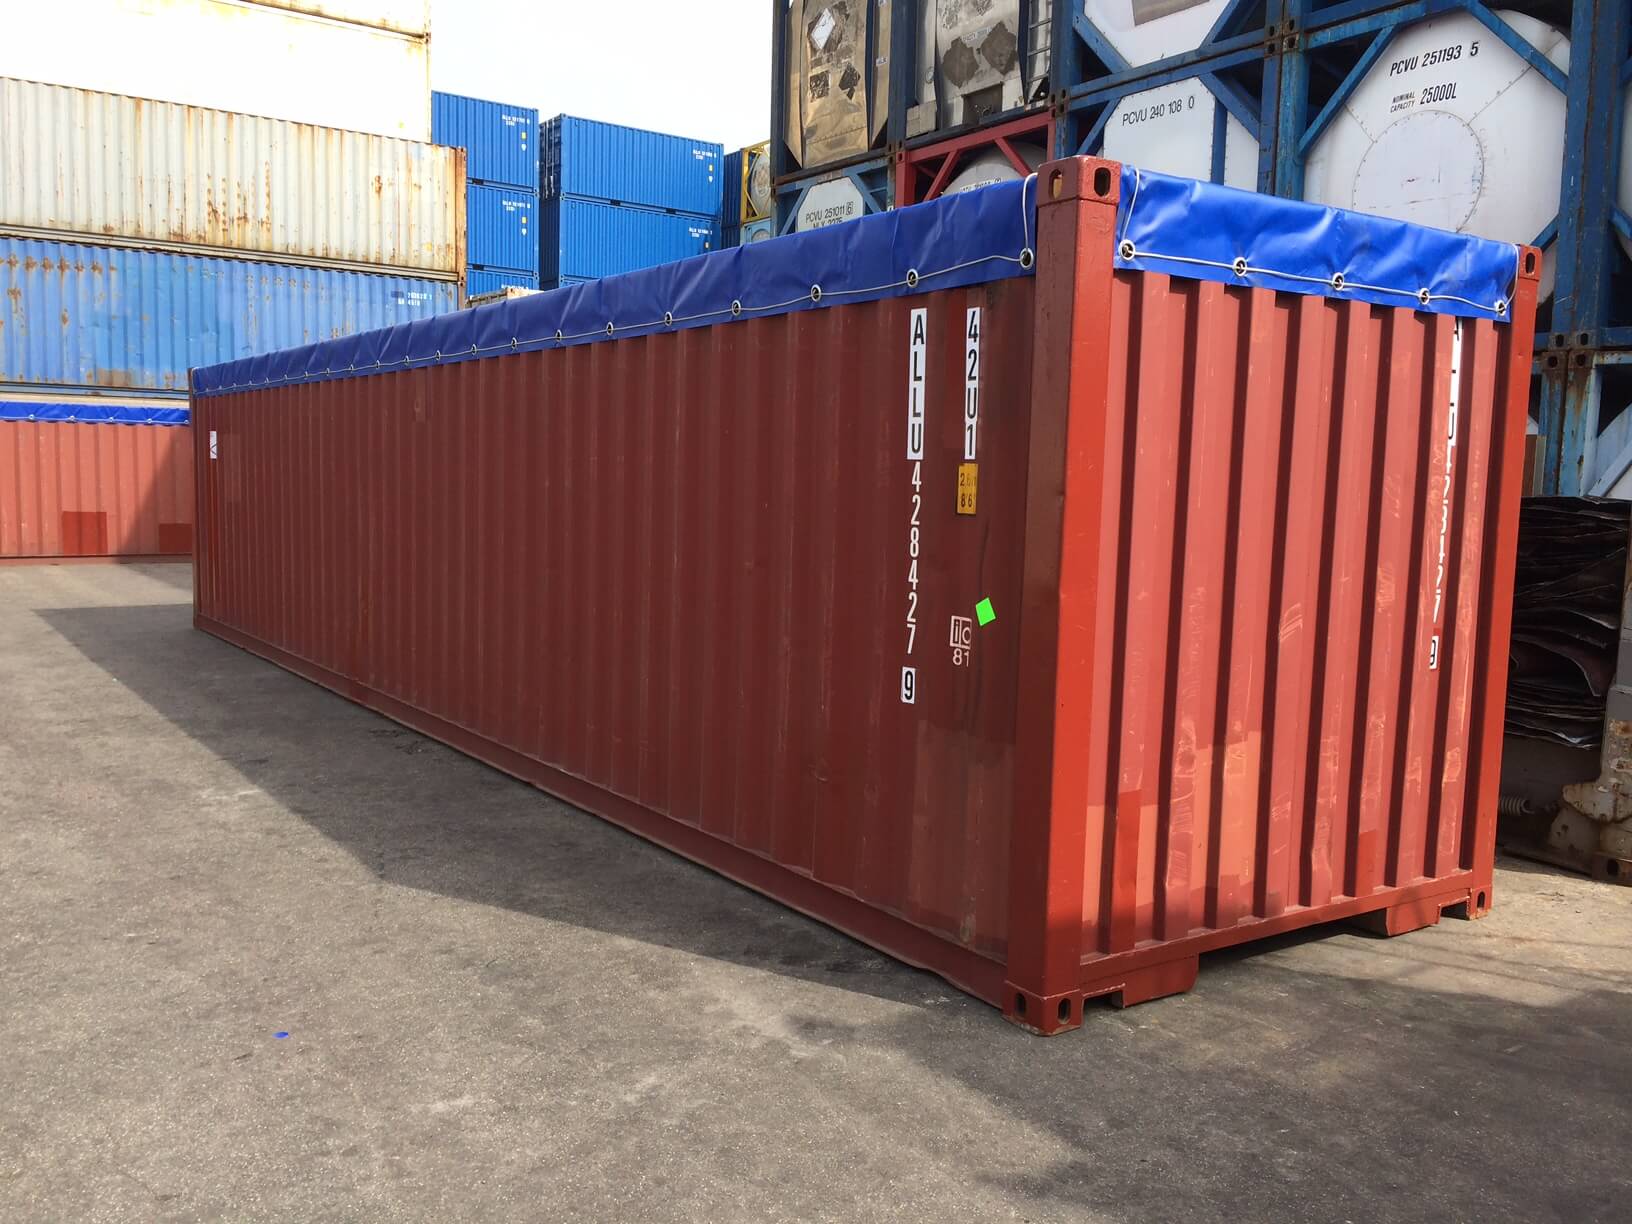  Containers